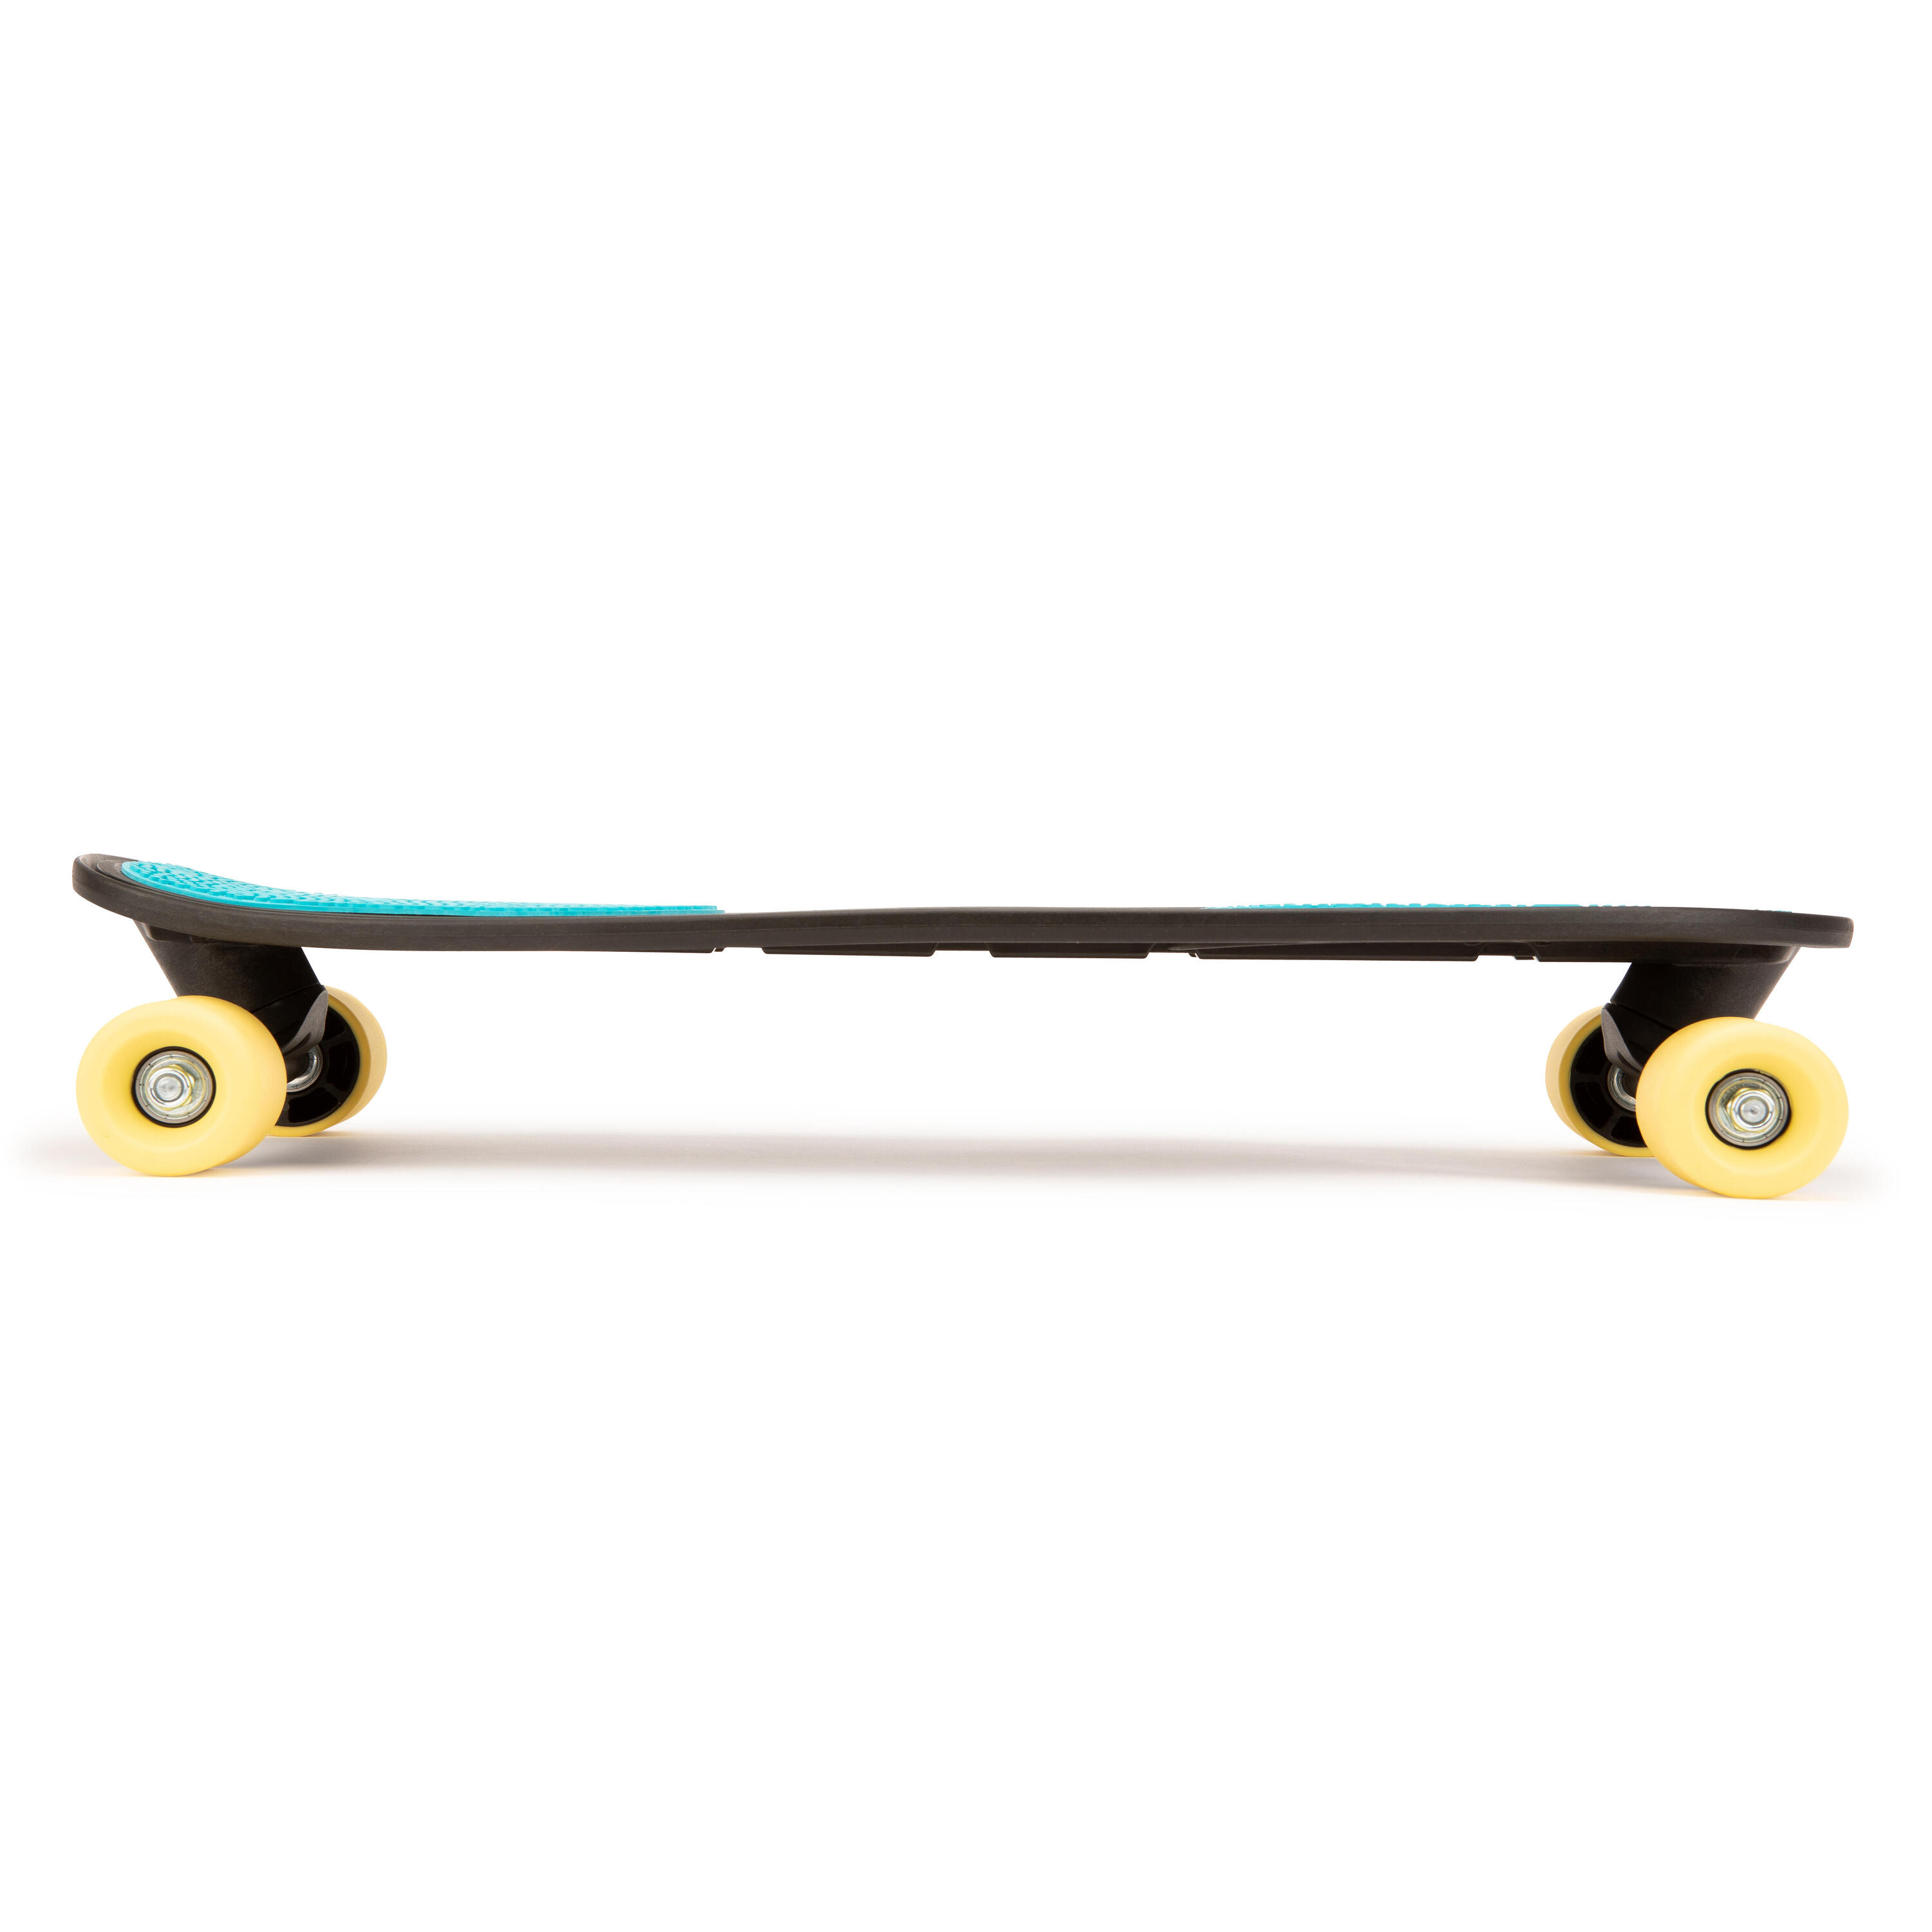 Kids' Skateboard Ages 18 Months and Up Play 100 3/11